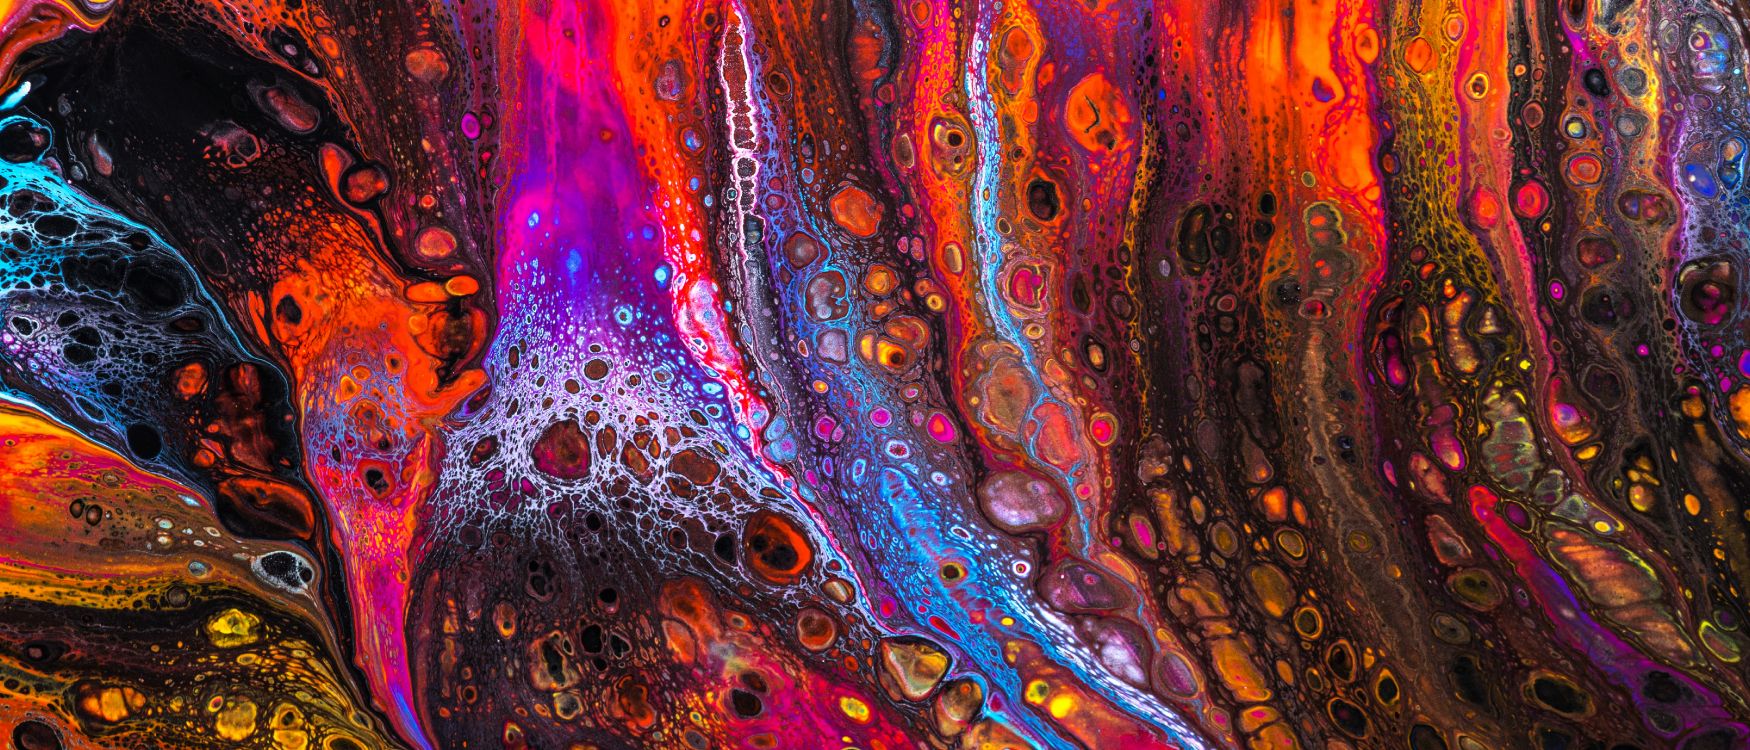 542572 High Resolution Wallpaper  psychedelic  Rare Gallery HD Wallpapers